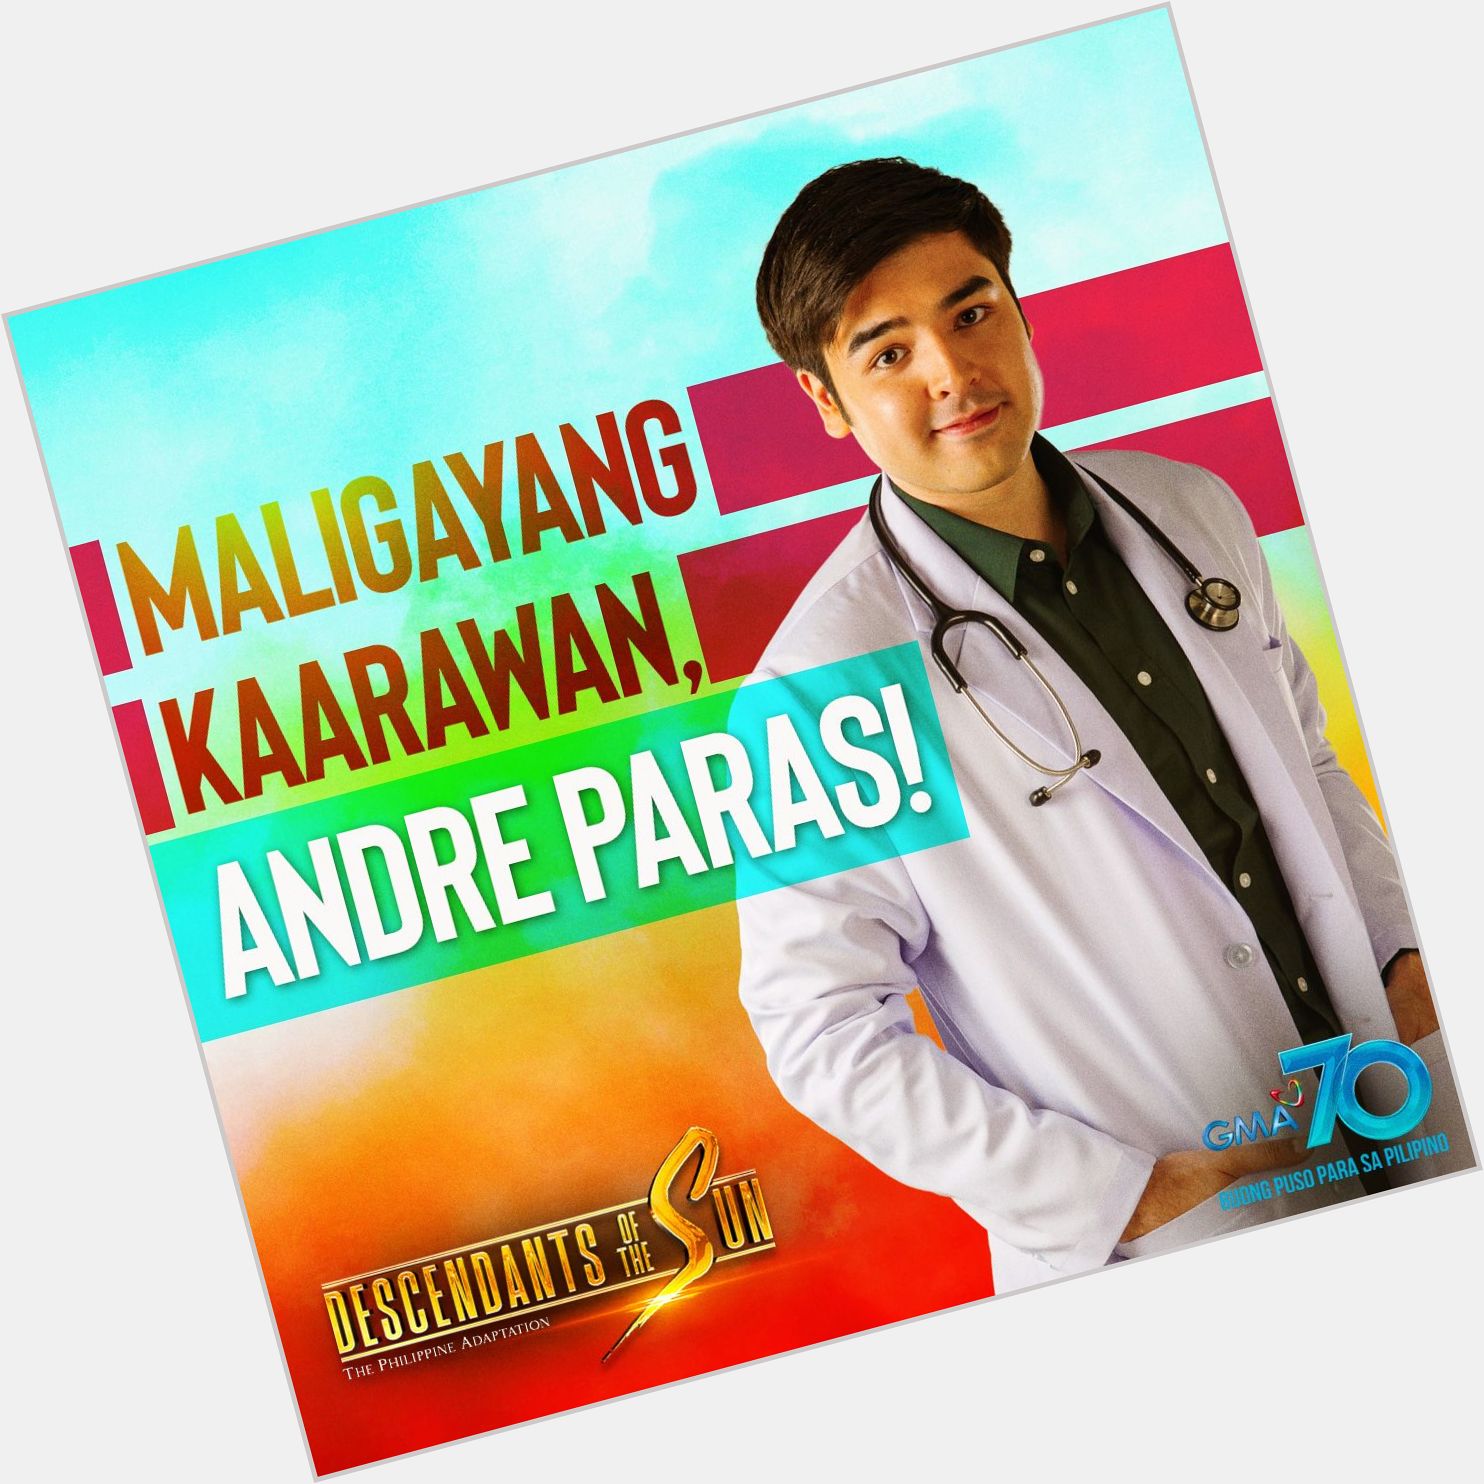 Happy birthday, Andre Paras! We wish you blessings and joy! 